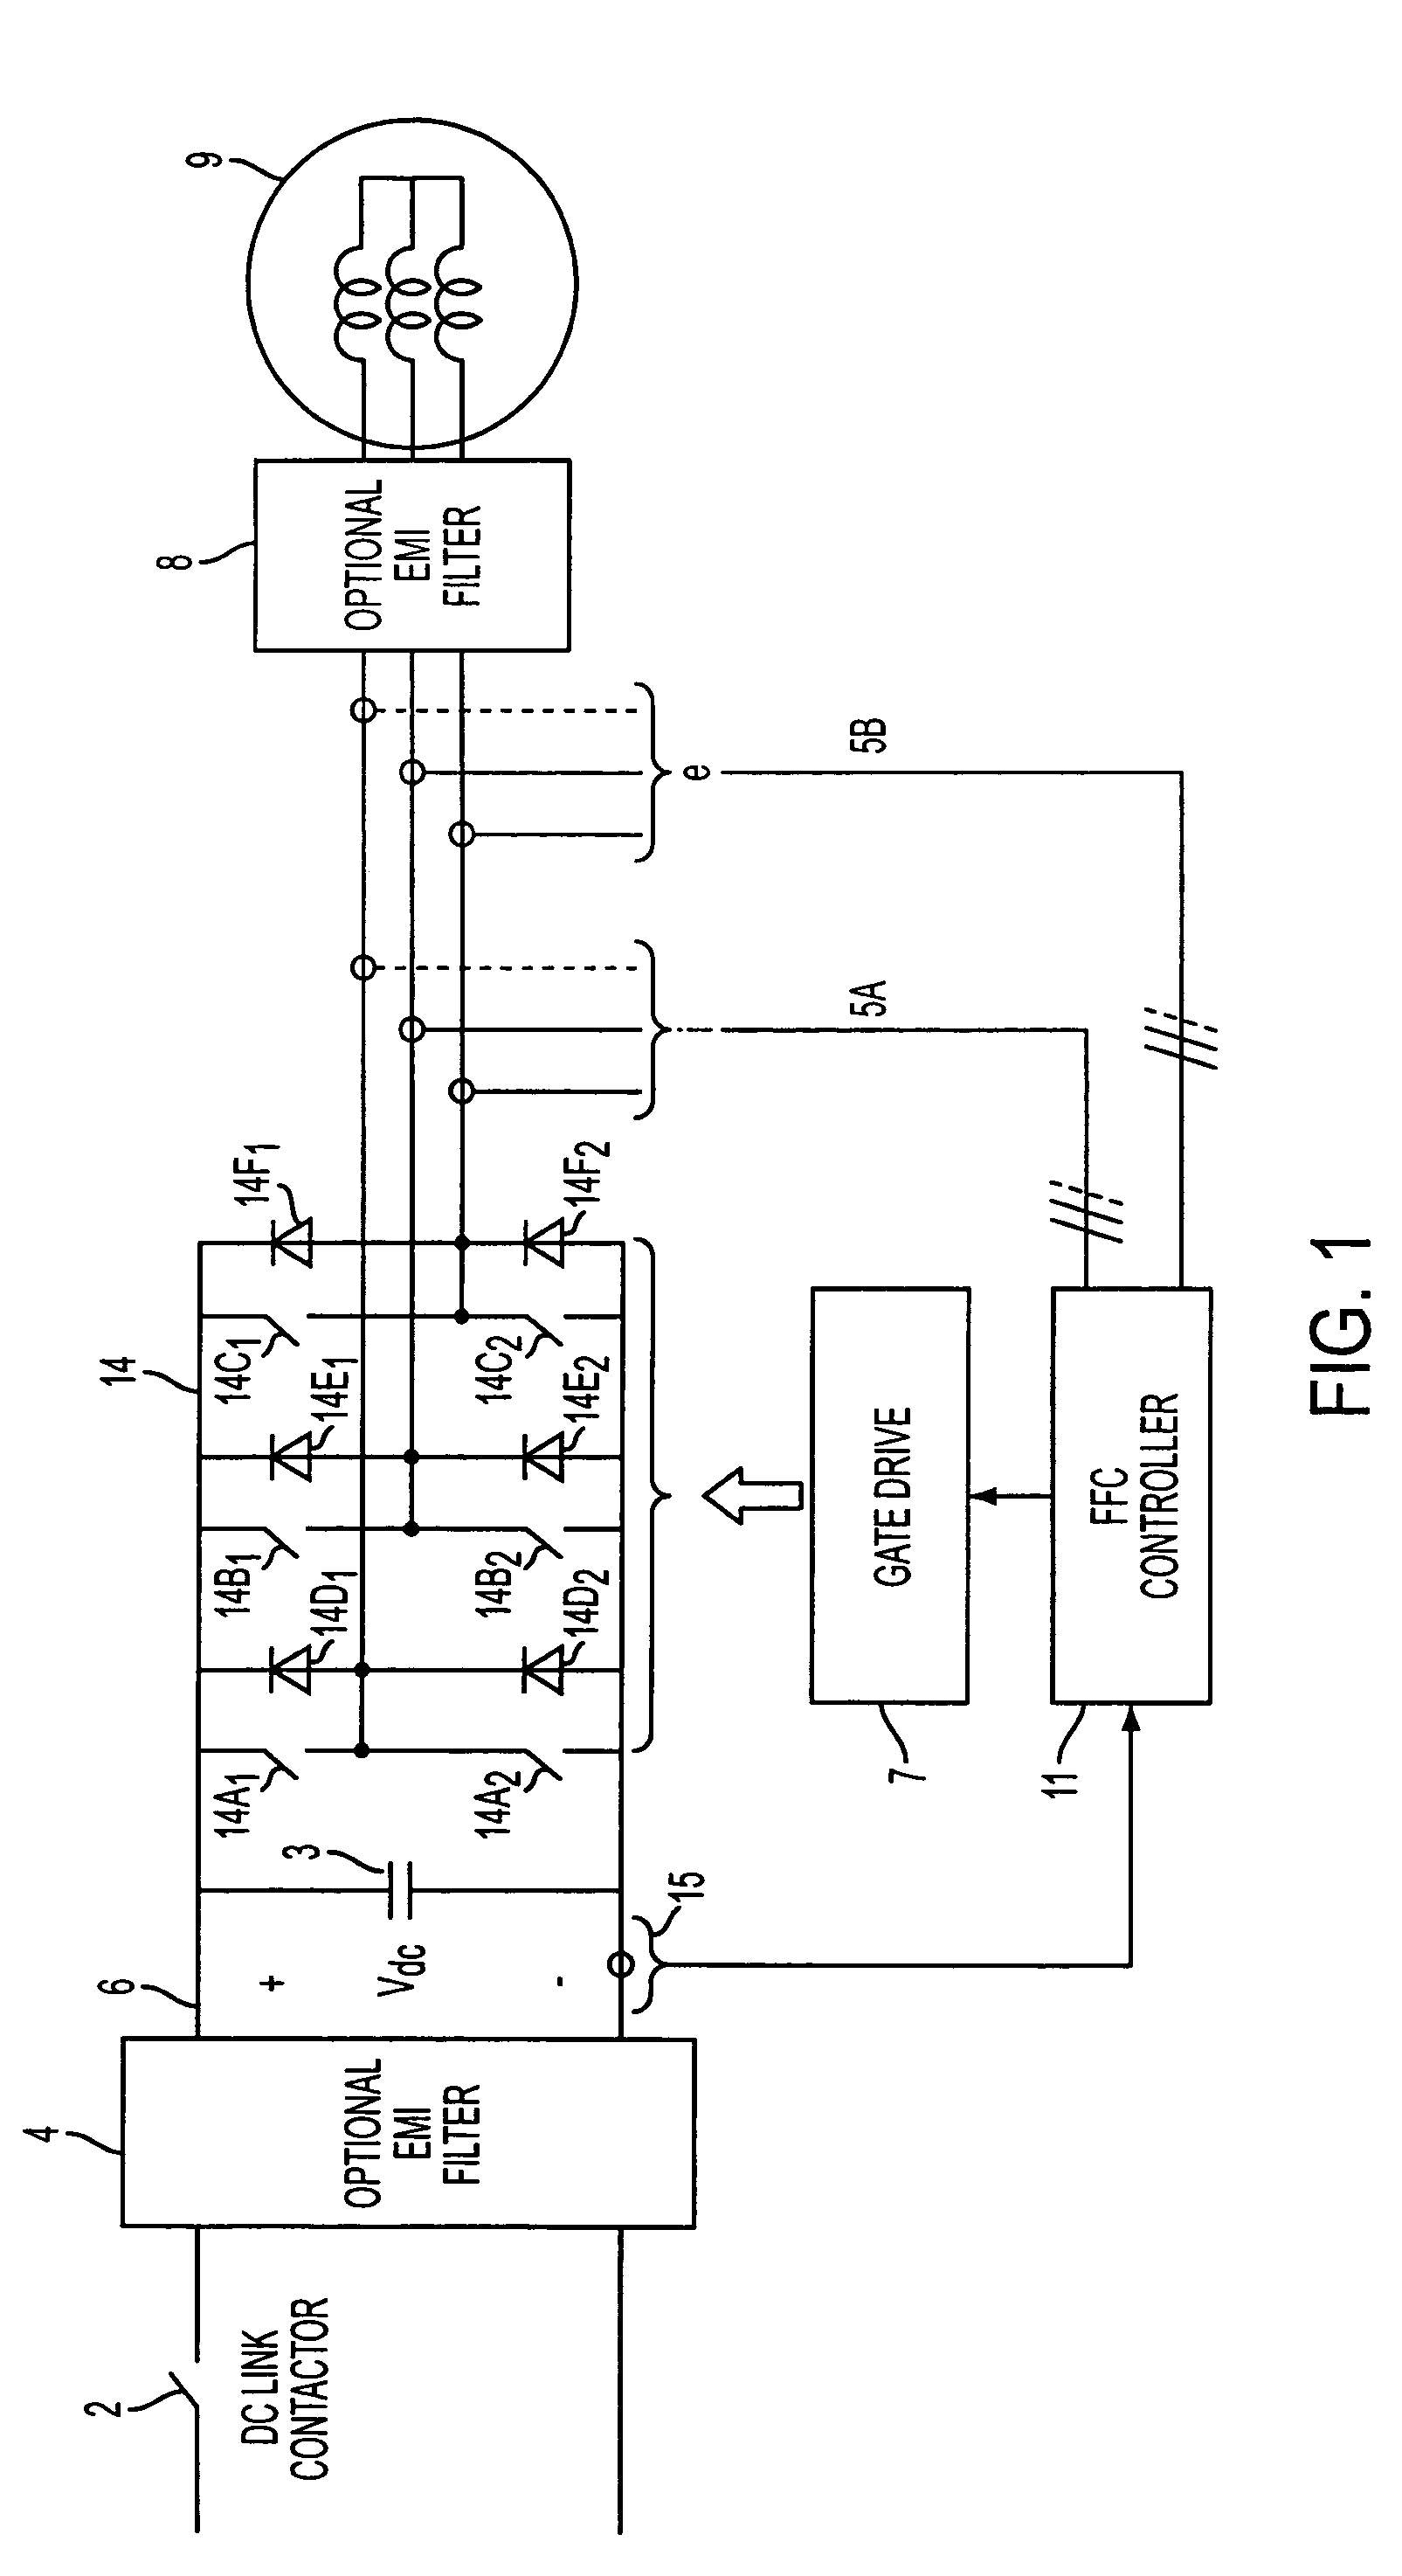 Enhanced floating reference frame controller for sensorless control of synchronous machines